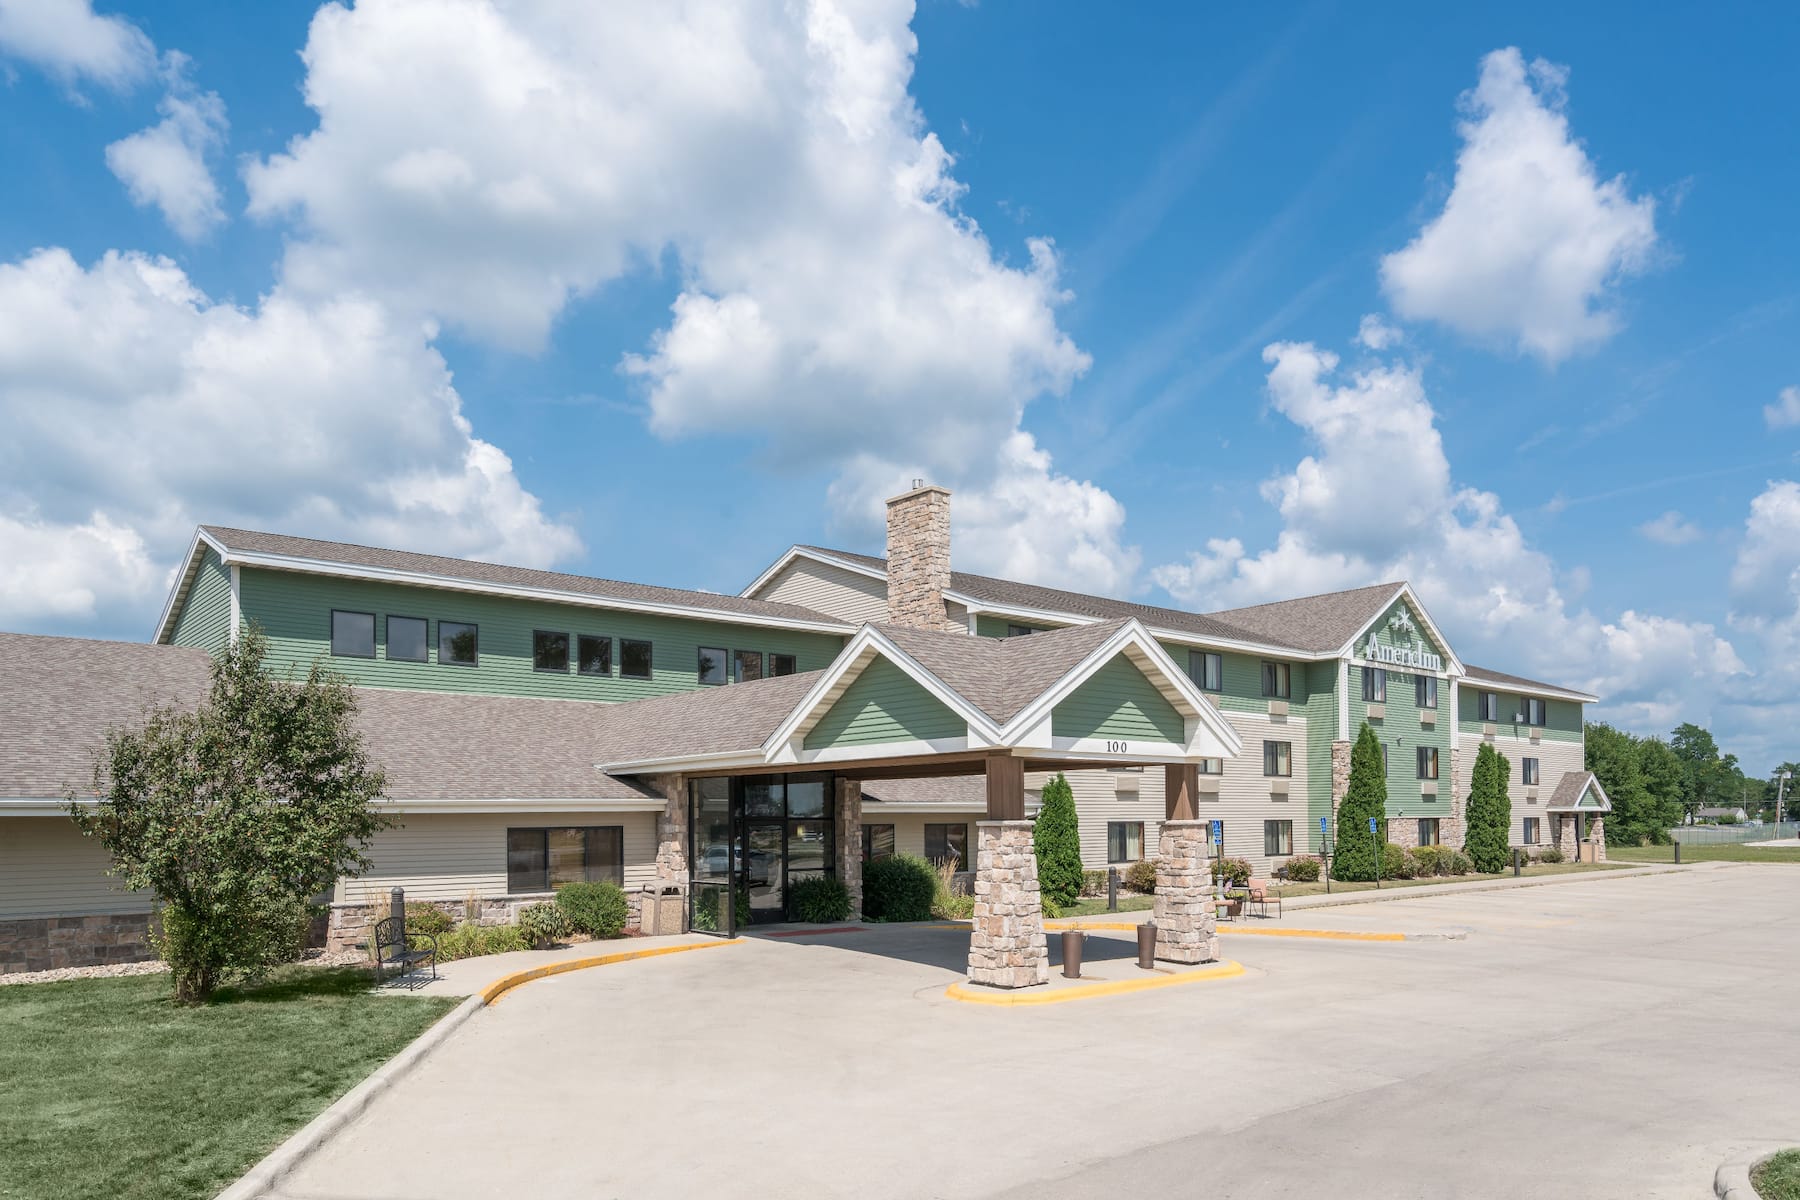 Exterior Day Image of AmericInn by Wyndham Fort Dodge hotel in Fort Dodge, Iowa...